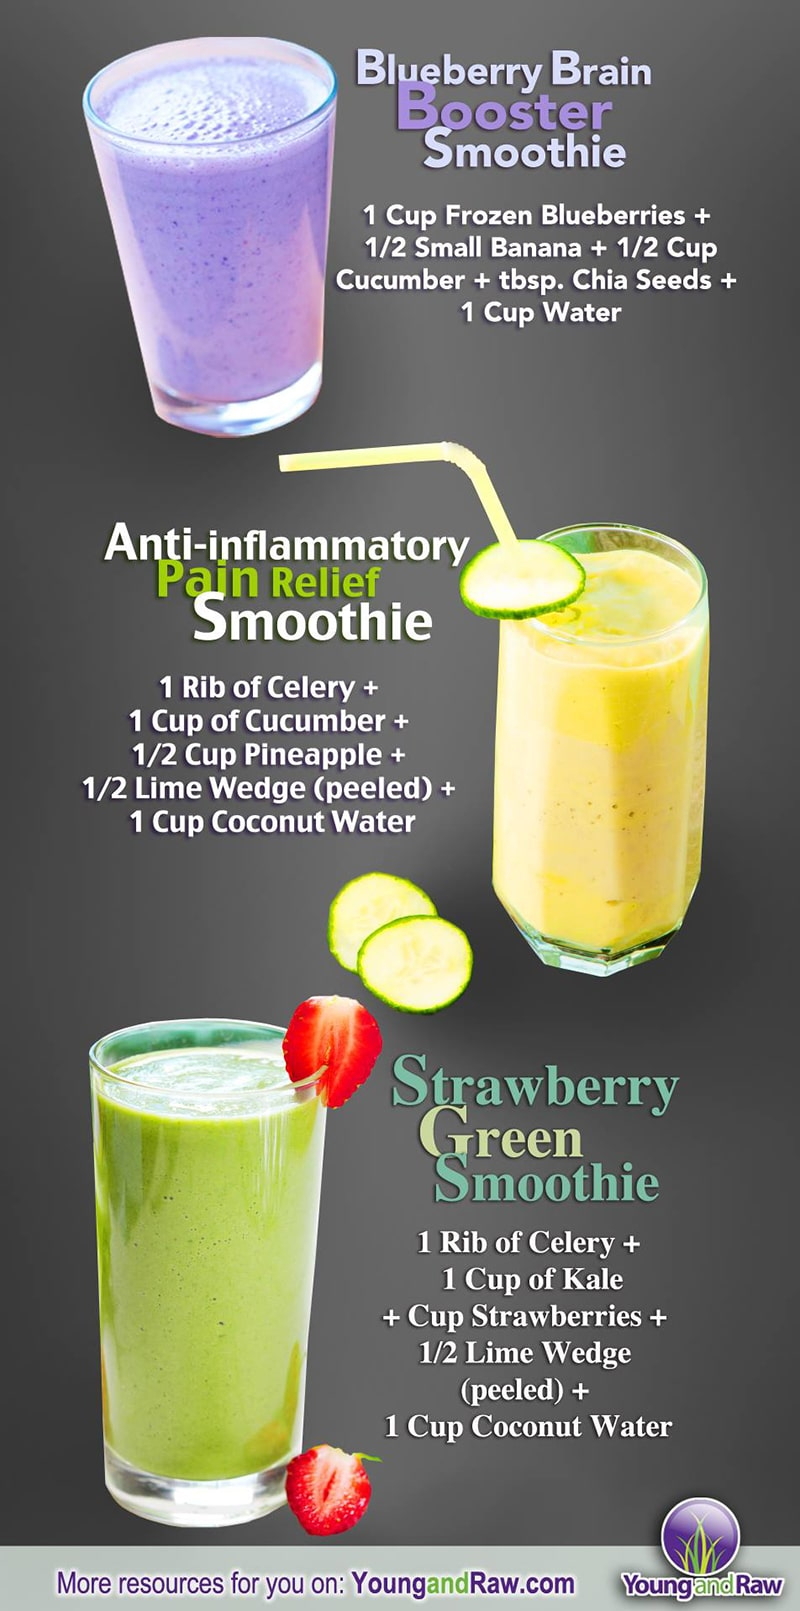 3 Smoothies For Inflammation And Pain Relief image 